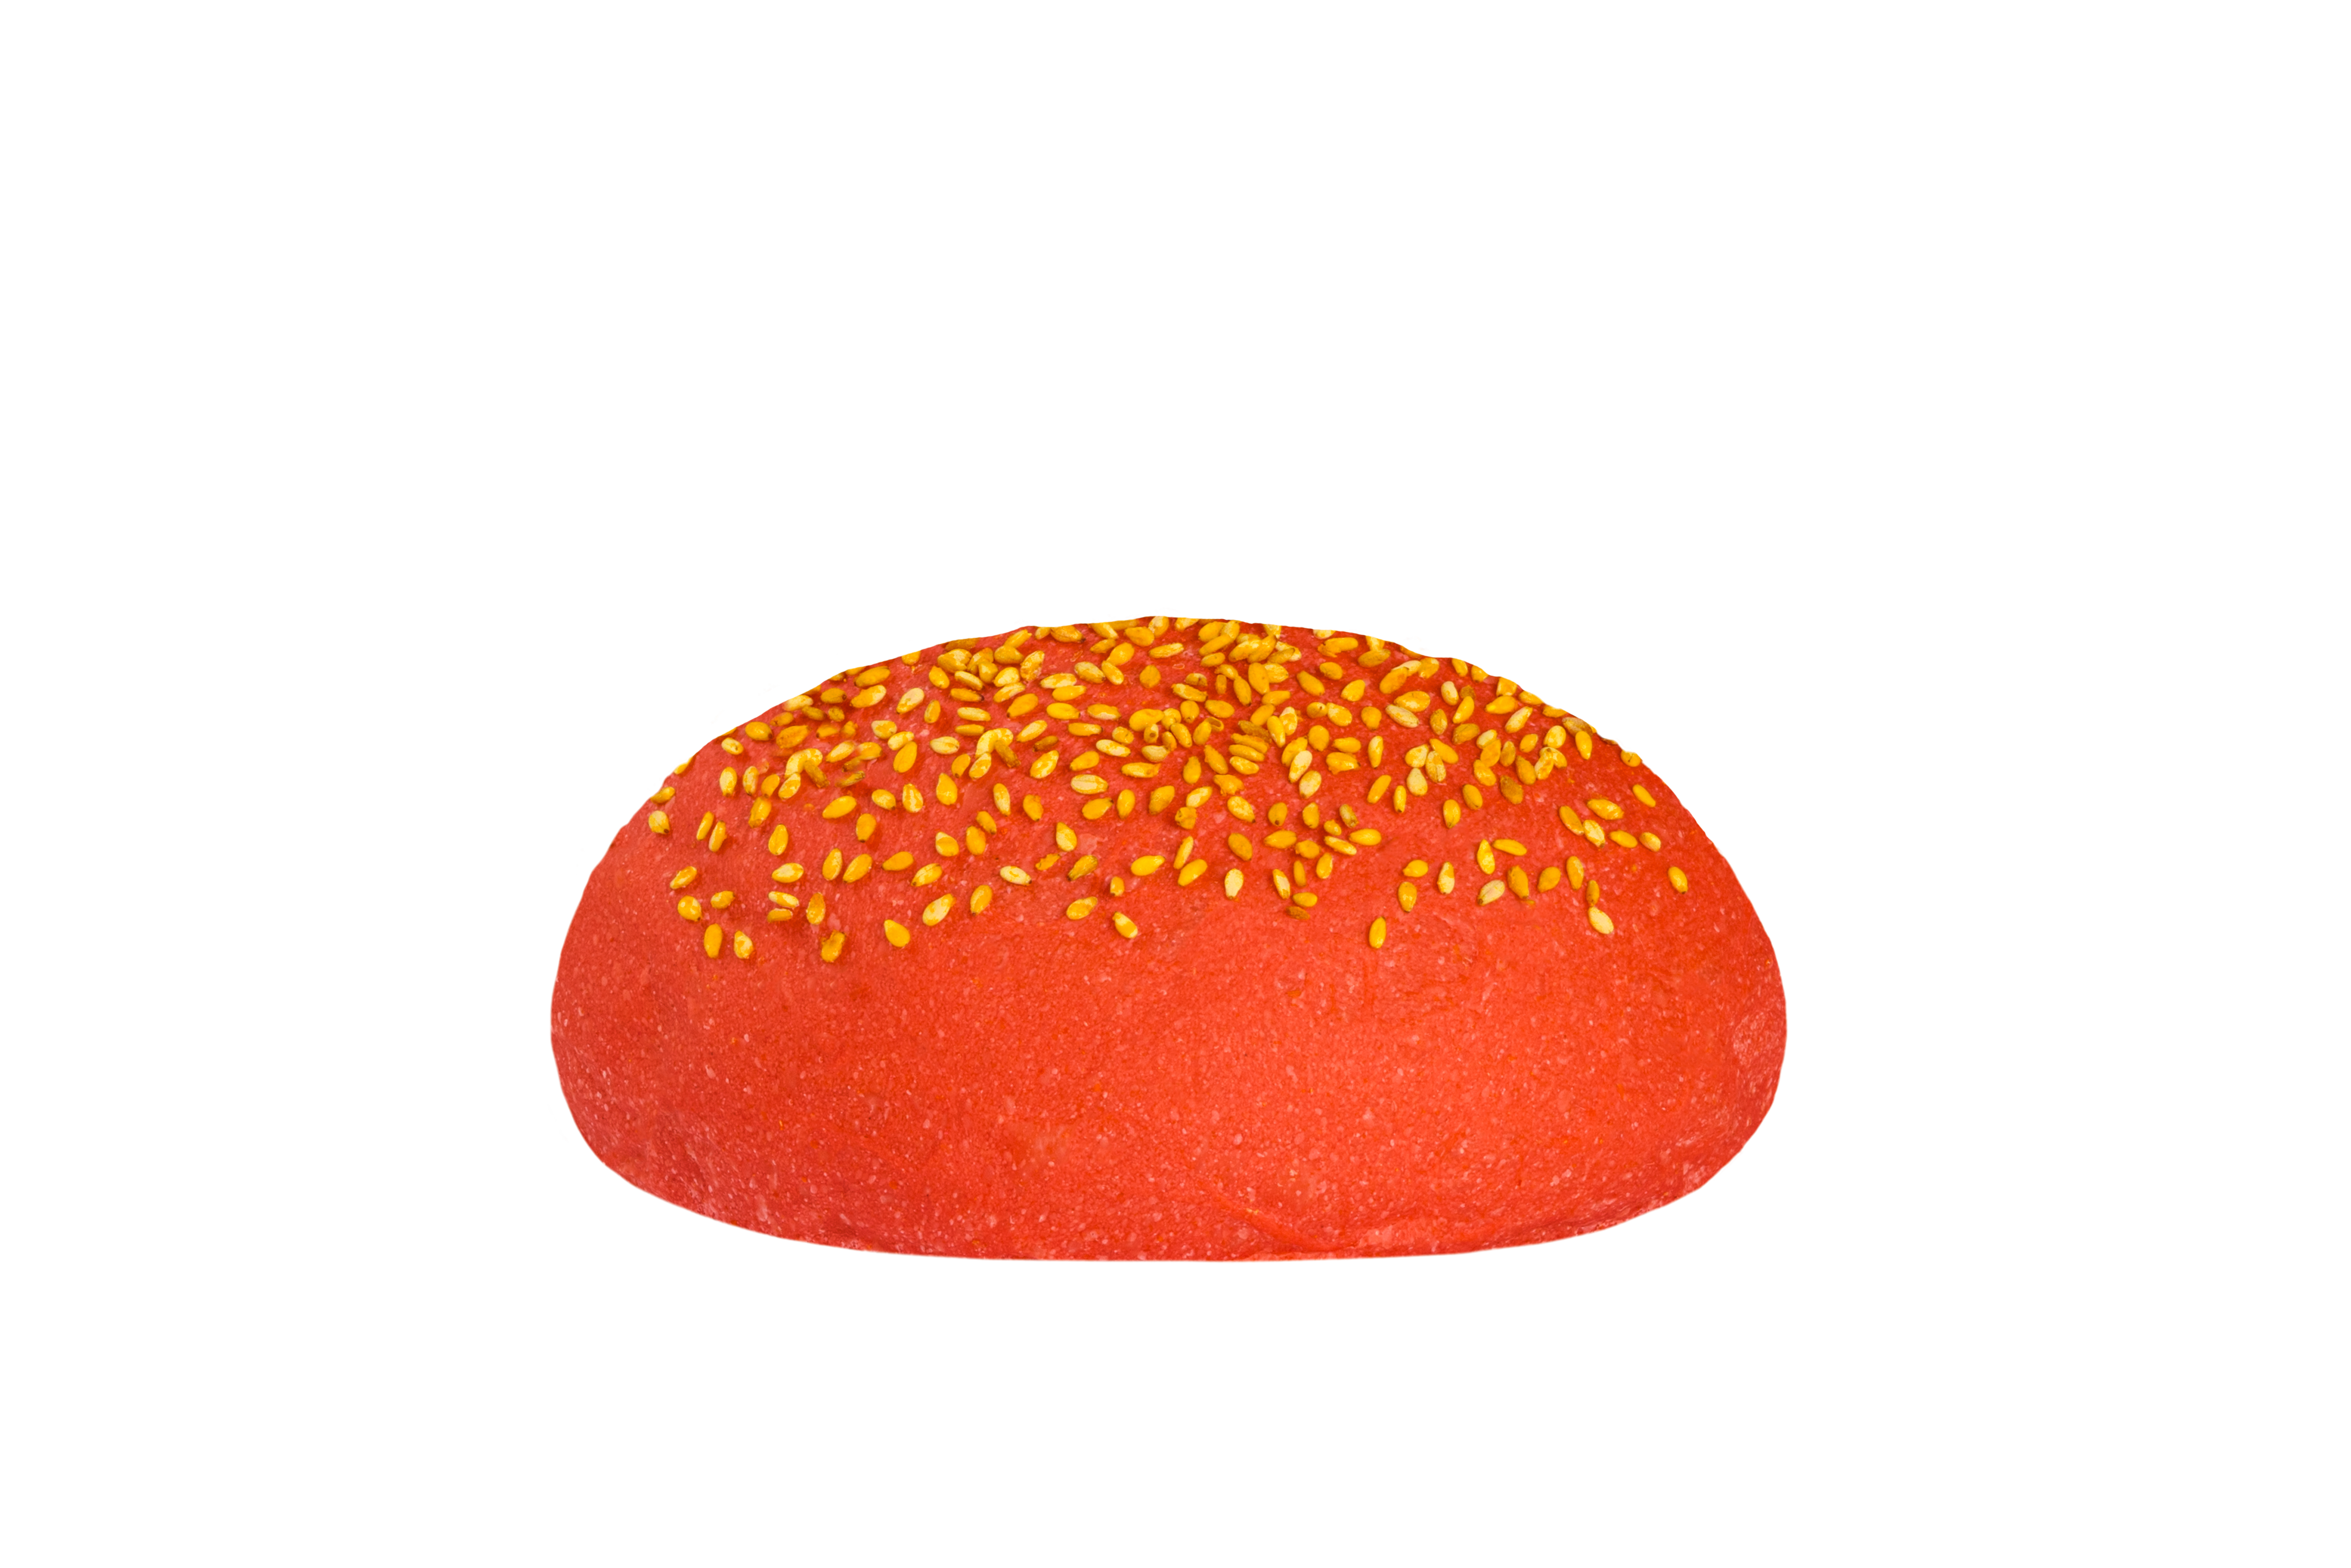 Red bun with yellow seeds